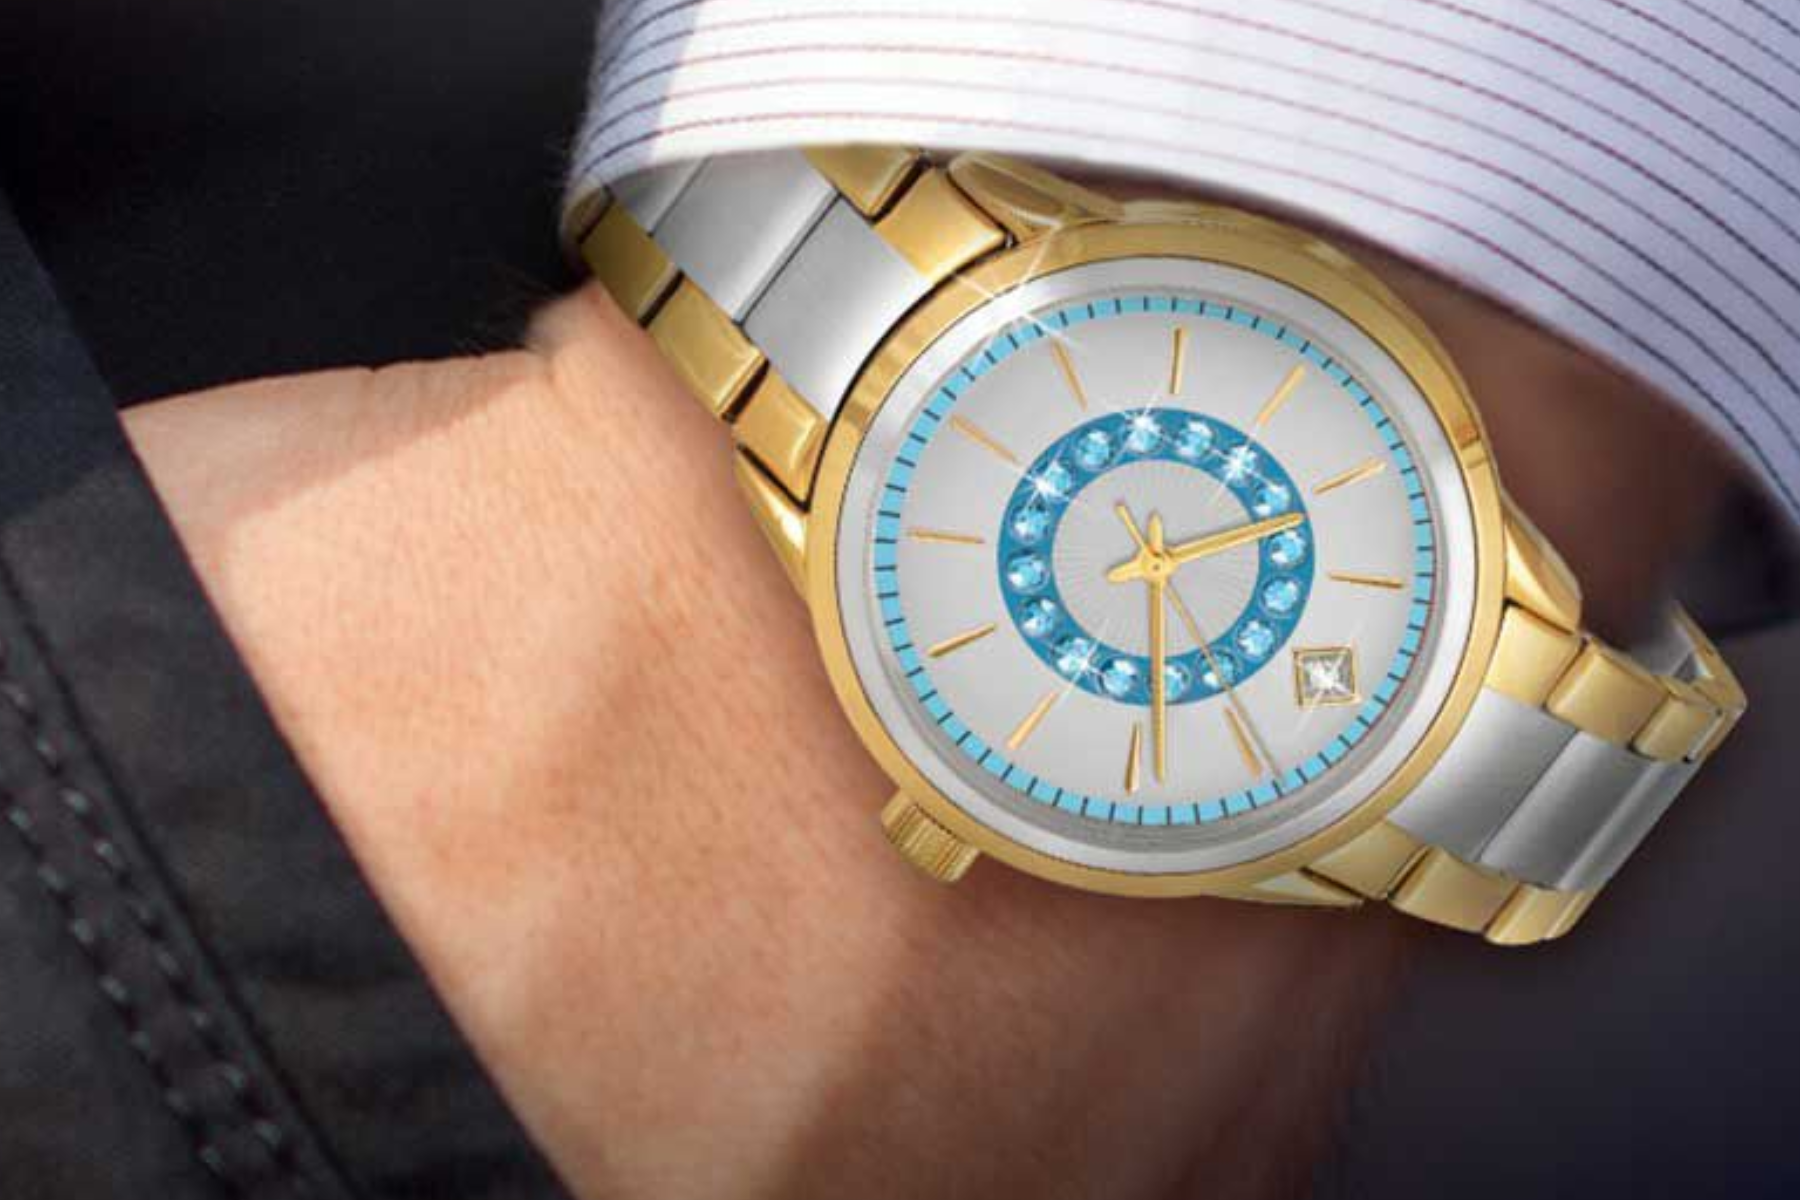 A man's wrist is adorned with a gold timepiece that contains blue birthstones